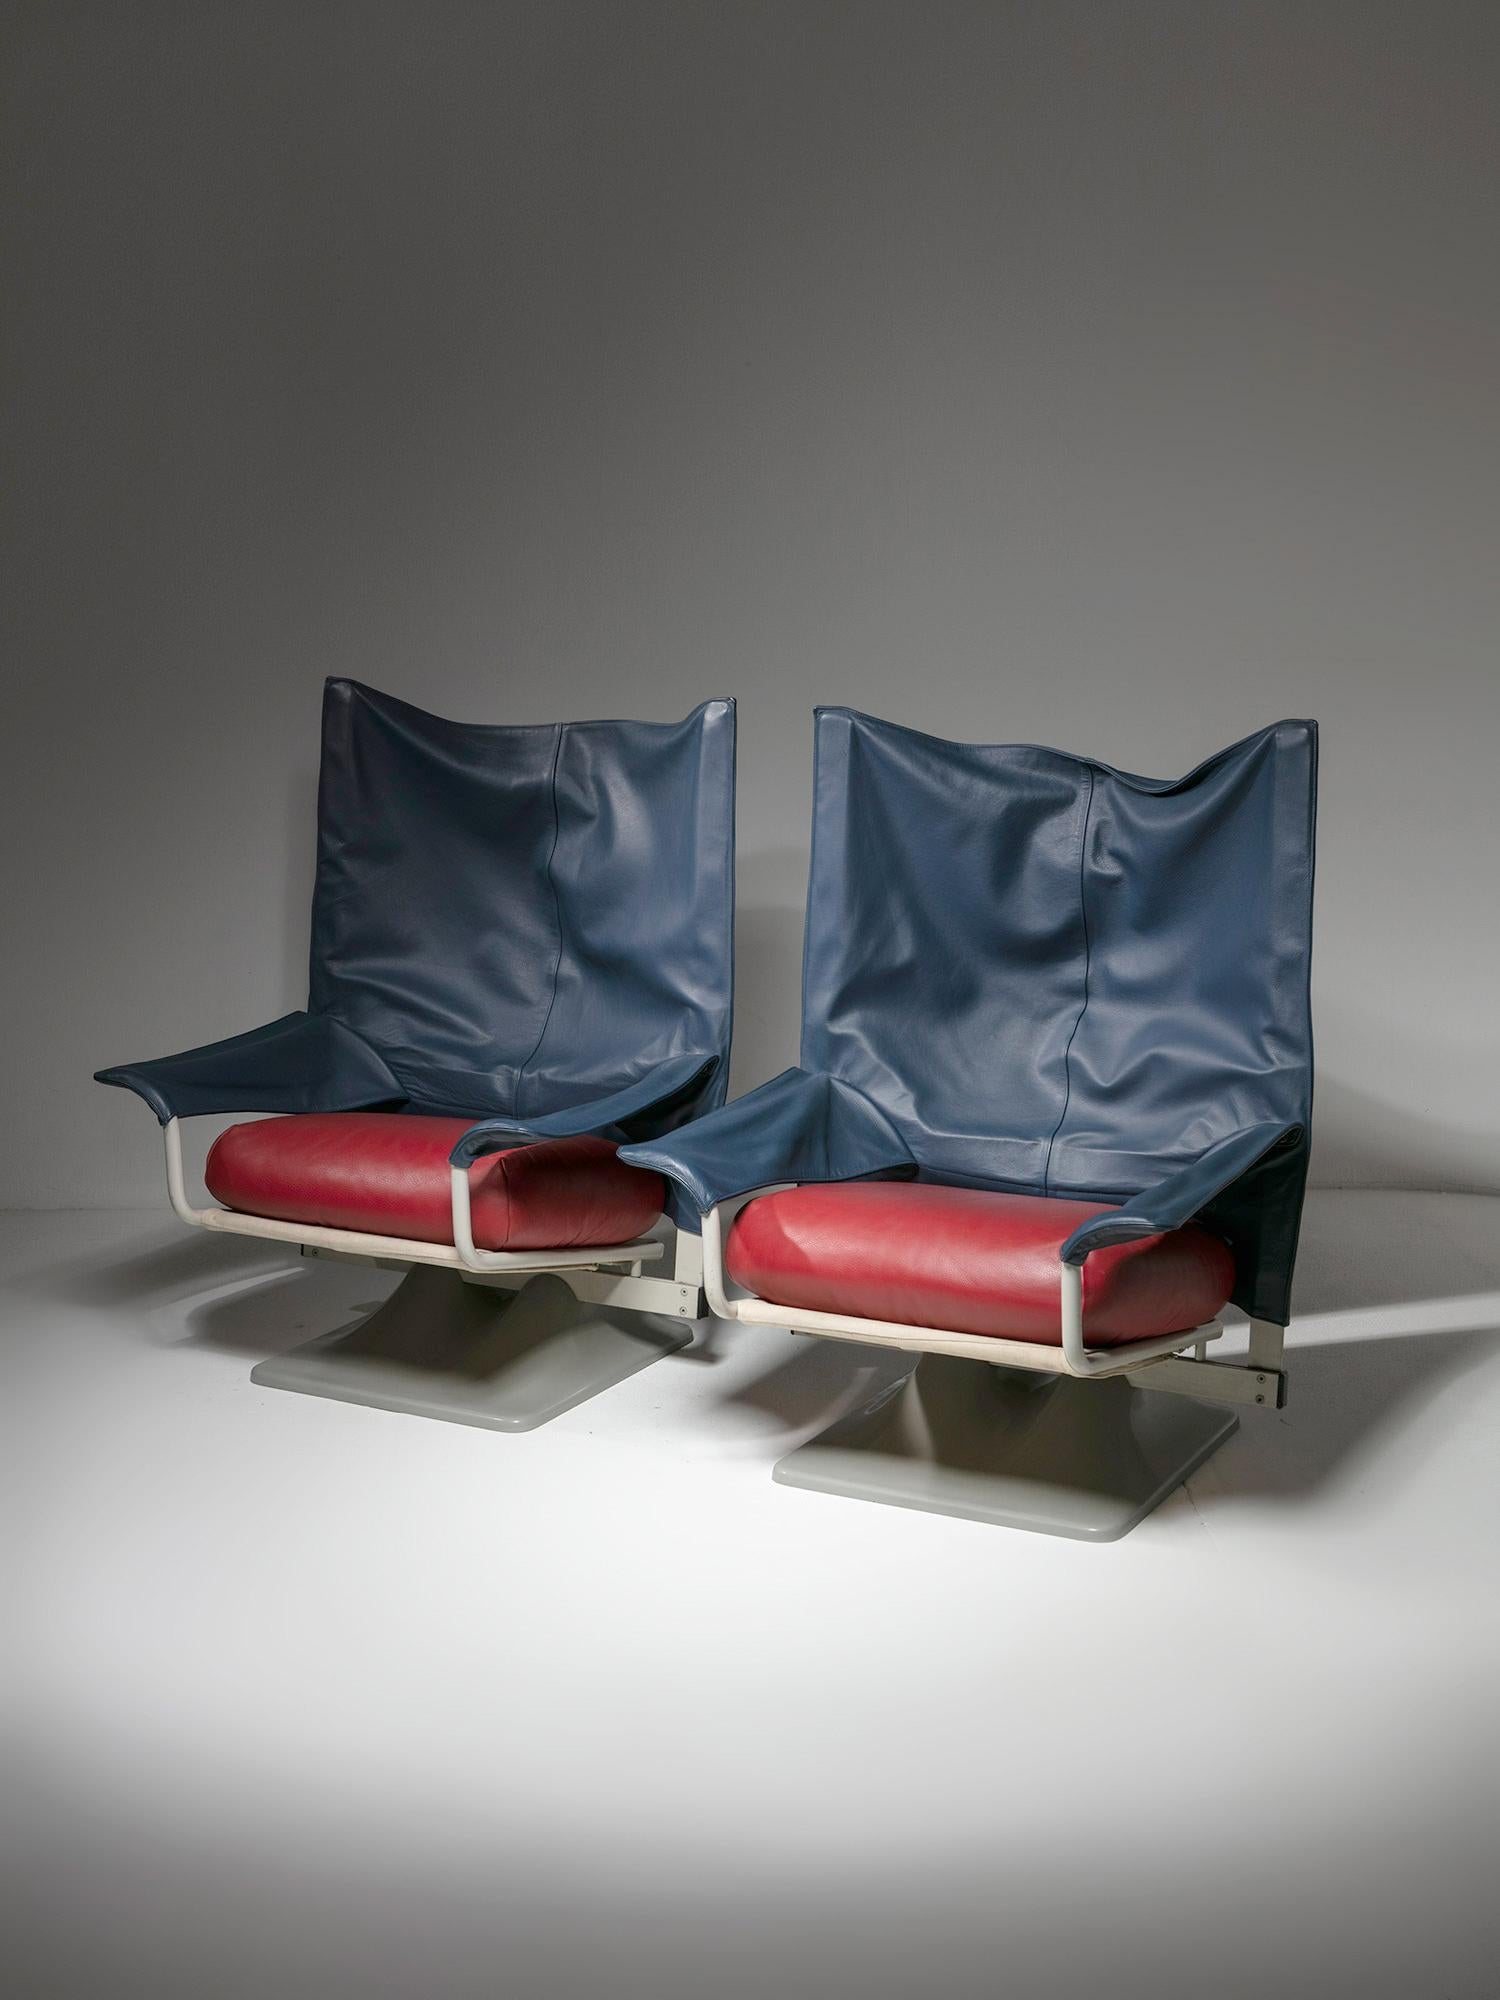 Pair of AEO leather lounge chairs by Archizoom Associati for Cassina.
Plastic organic-shaped base, red pillow, blue backseat and lacquered metal frame for this extremely comfortable seat.